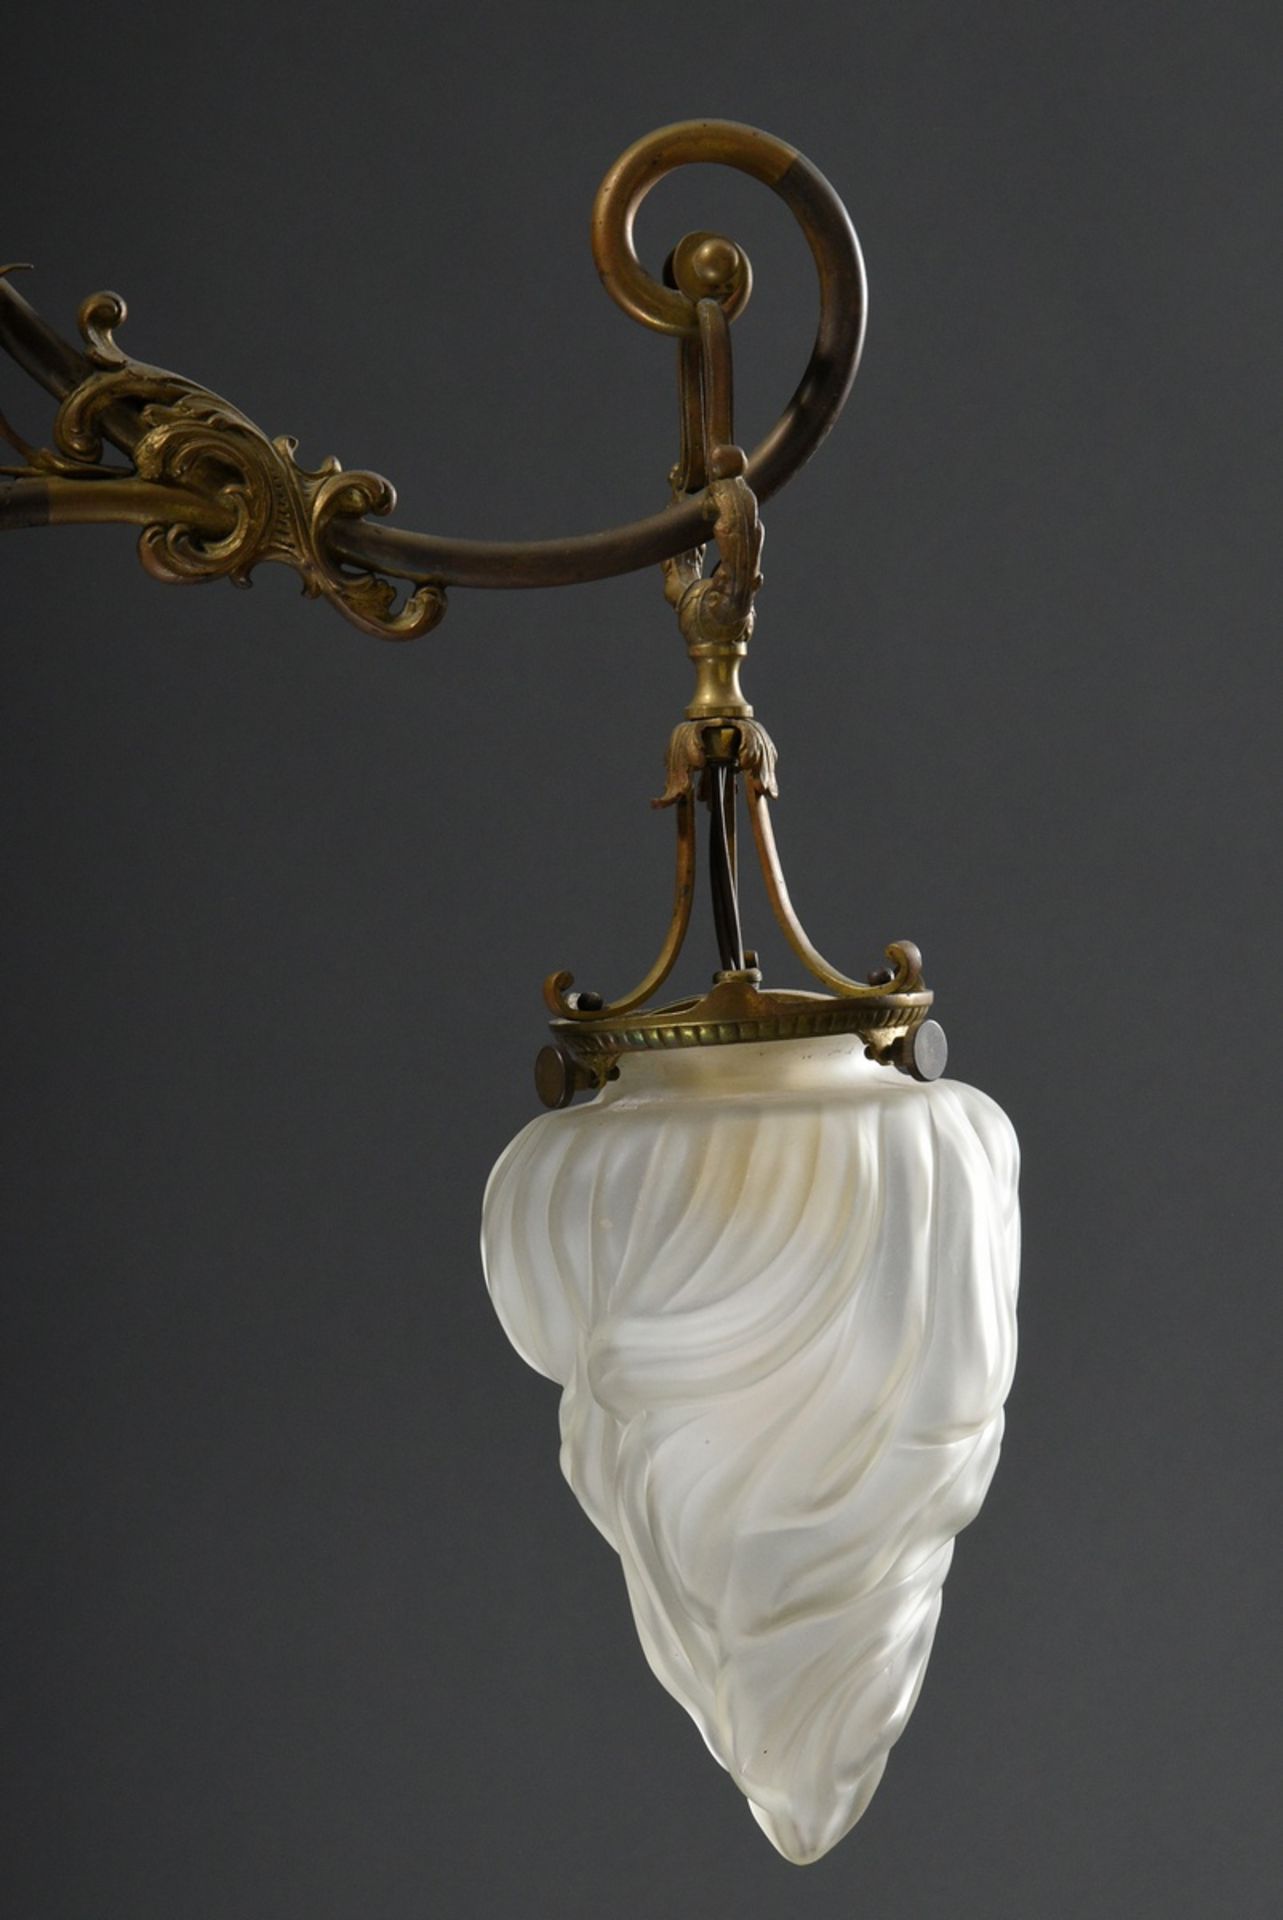 Wilhelminian period ceiling lamp with 4 frosted "flames" glass domes on brass frame with floral dec - Image 7 of 12